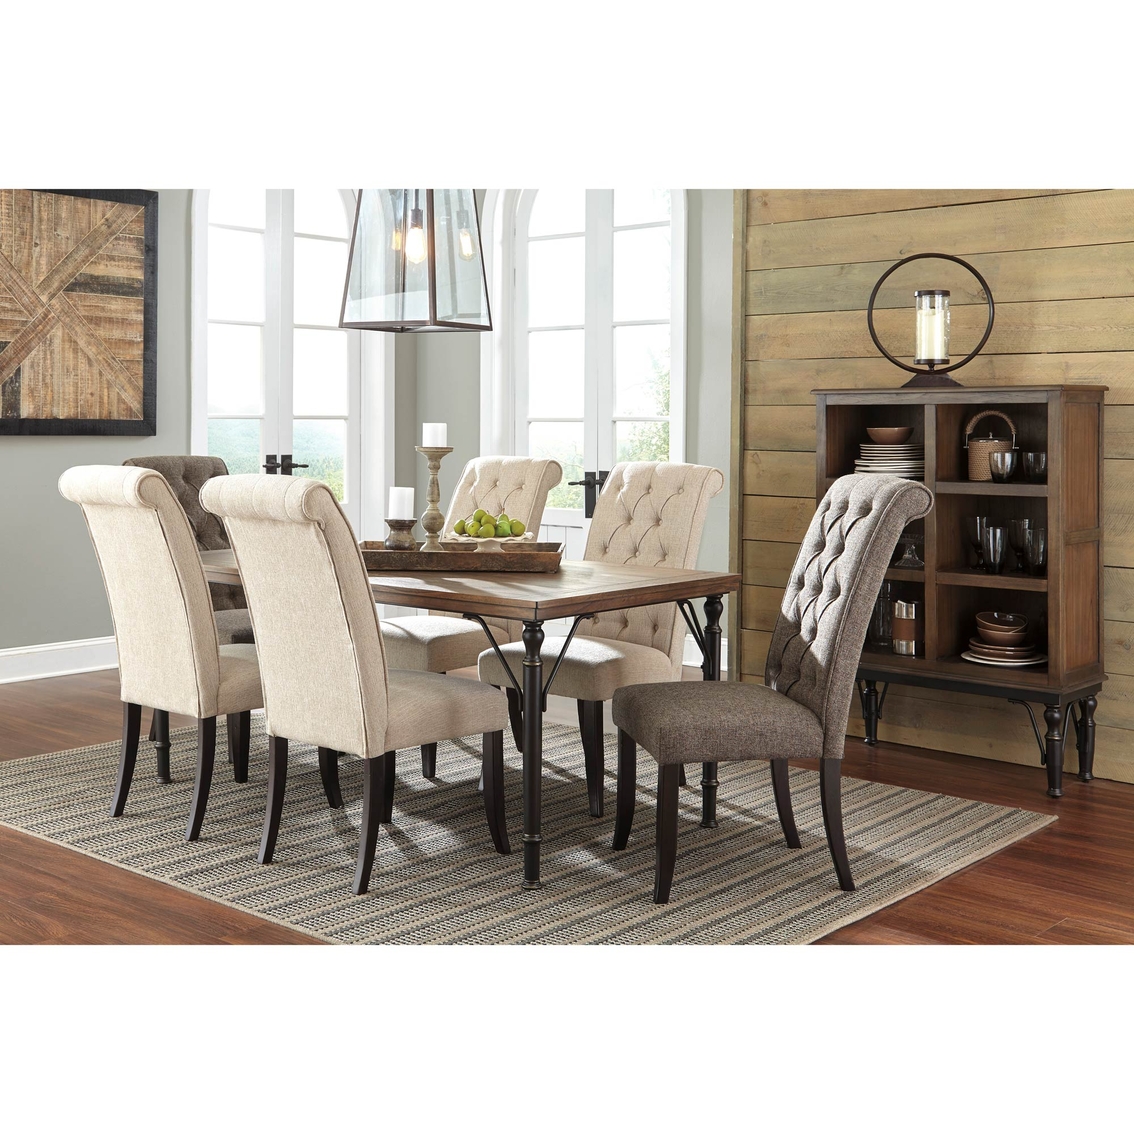 Ashley Tripton Upholstered Dining Chair 2 Pk. - Image 2 of 2